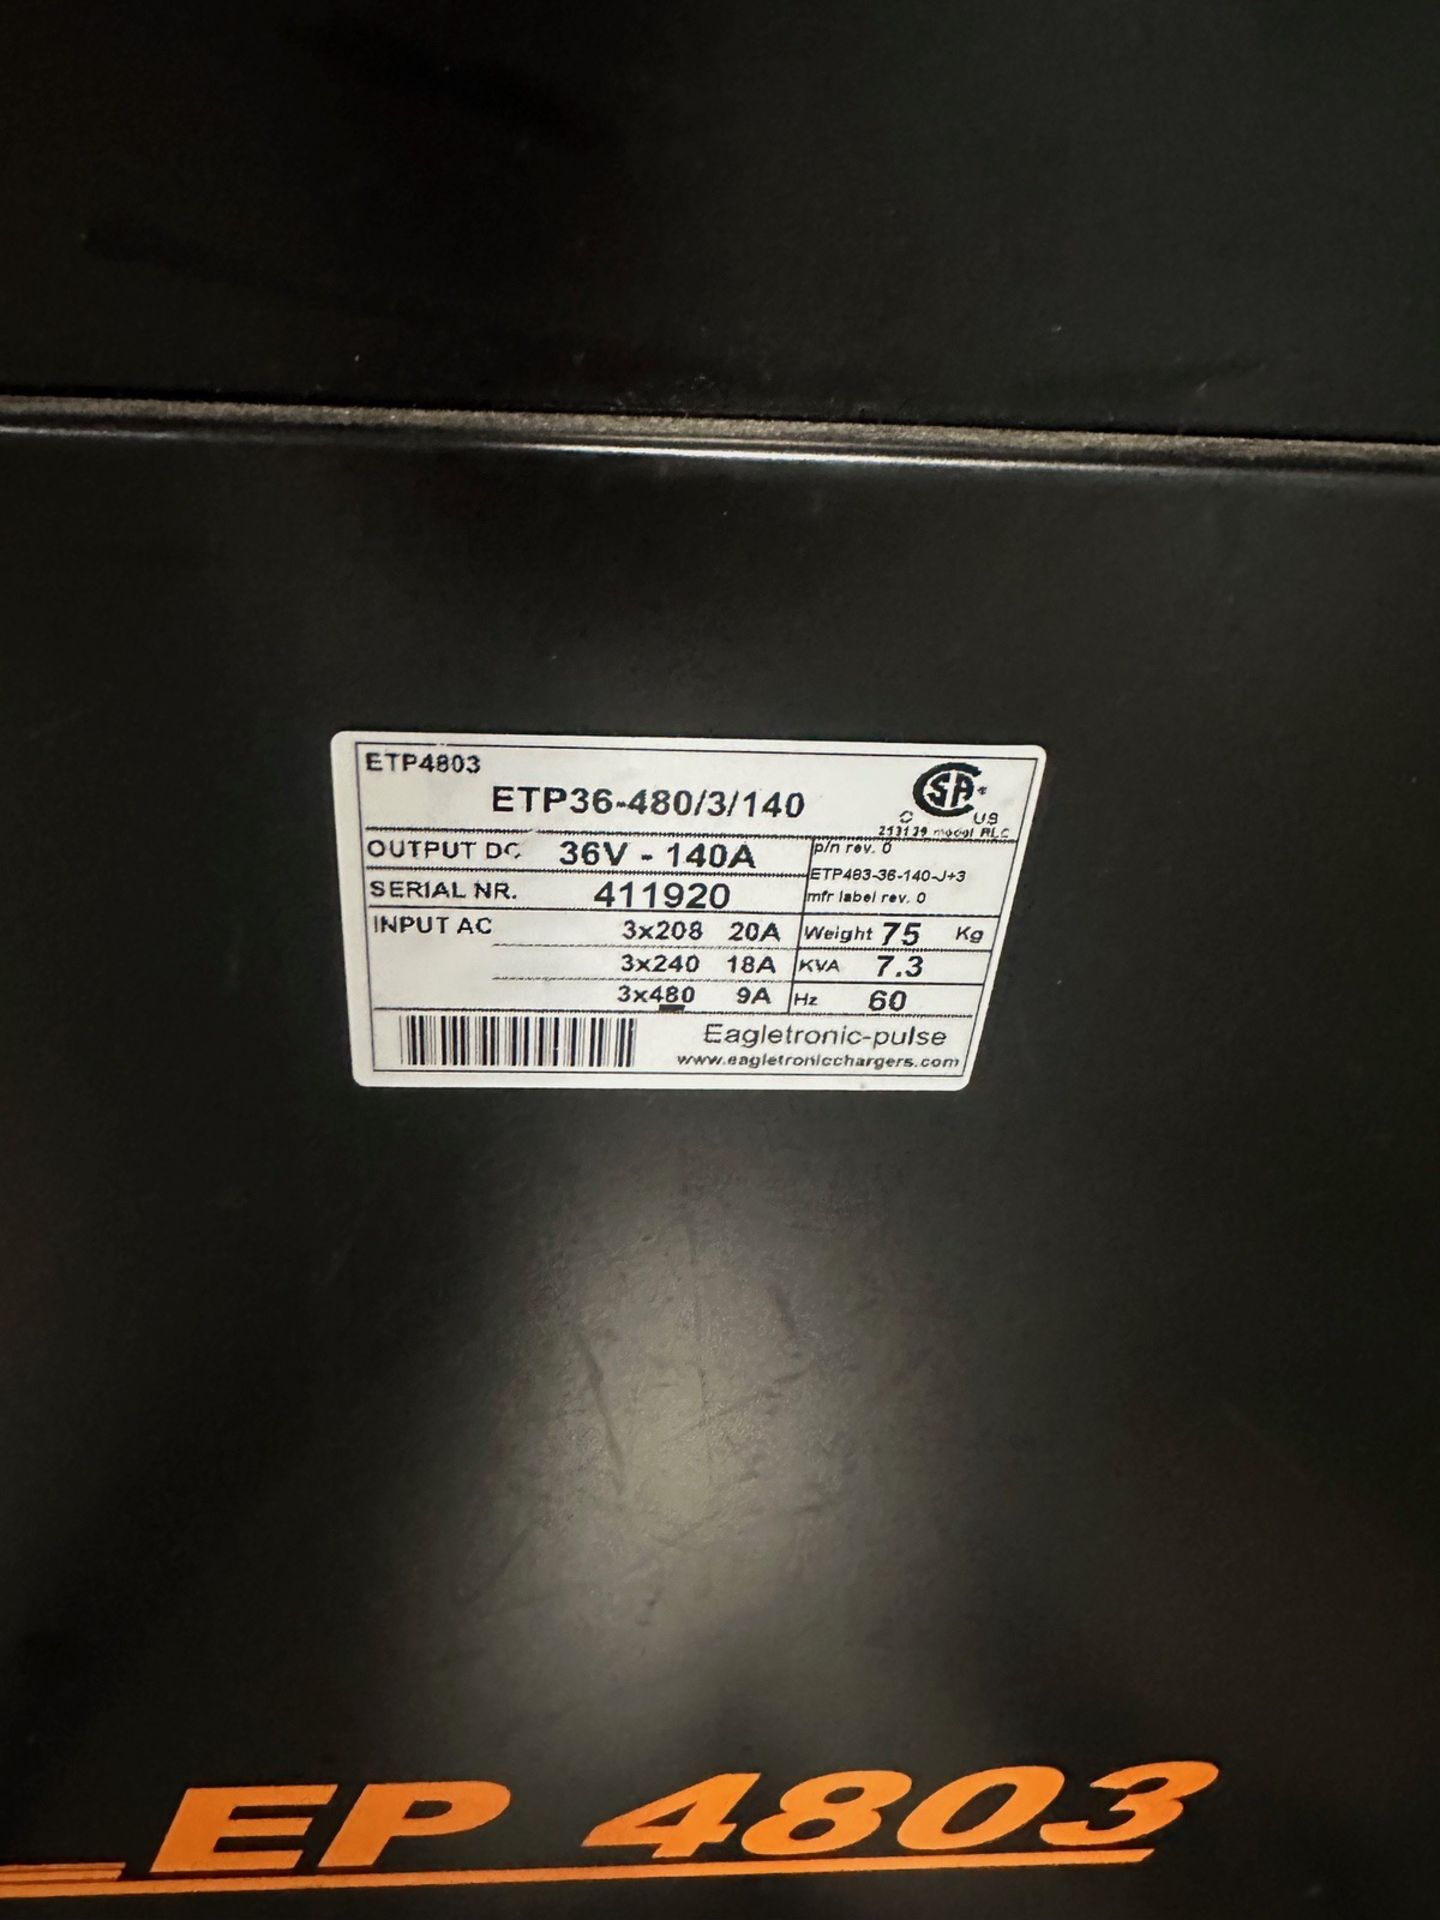 EP 4803 Battery Charger, Model ETP36-480/3/140, S/N 411920 - Image 2 of 3